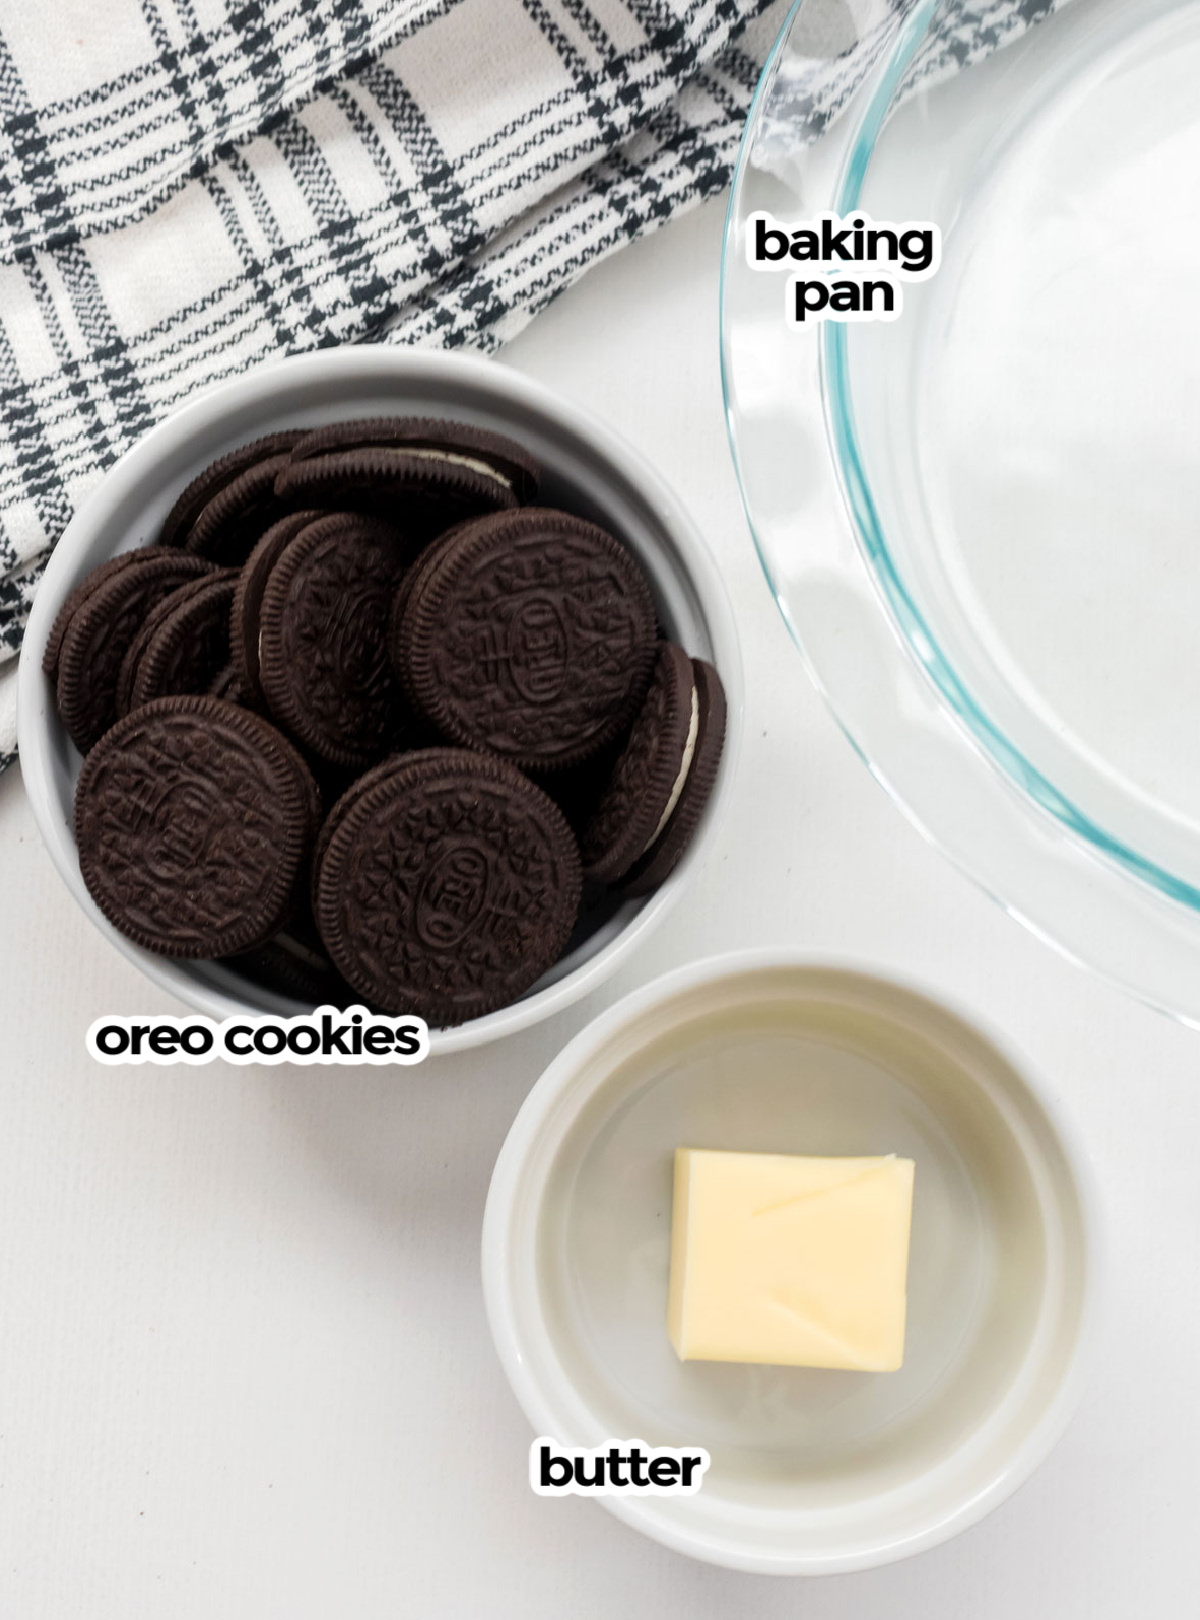 All the ingredients you will need to learn how to make Oreo Crusts including a pie pan, Oreo Cookies and Melted Butter.